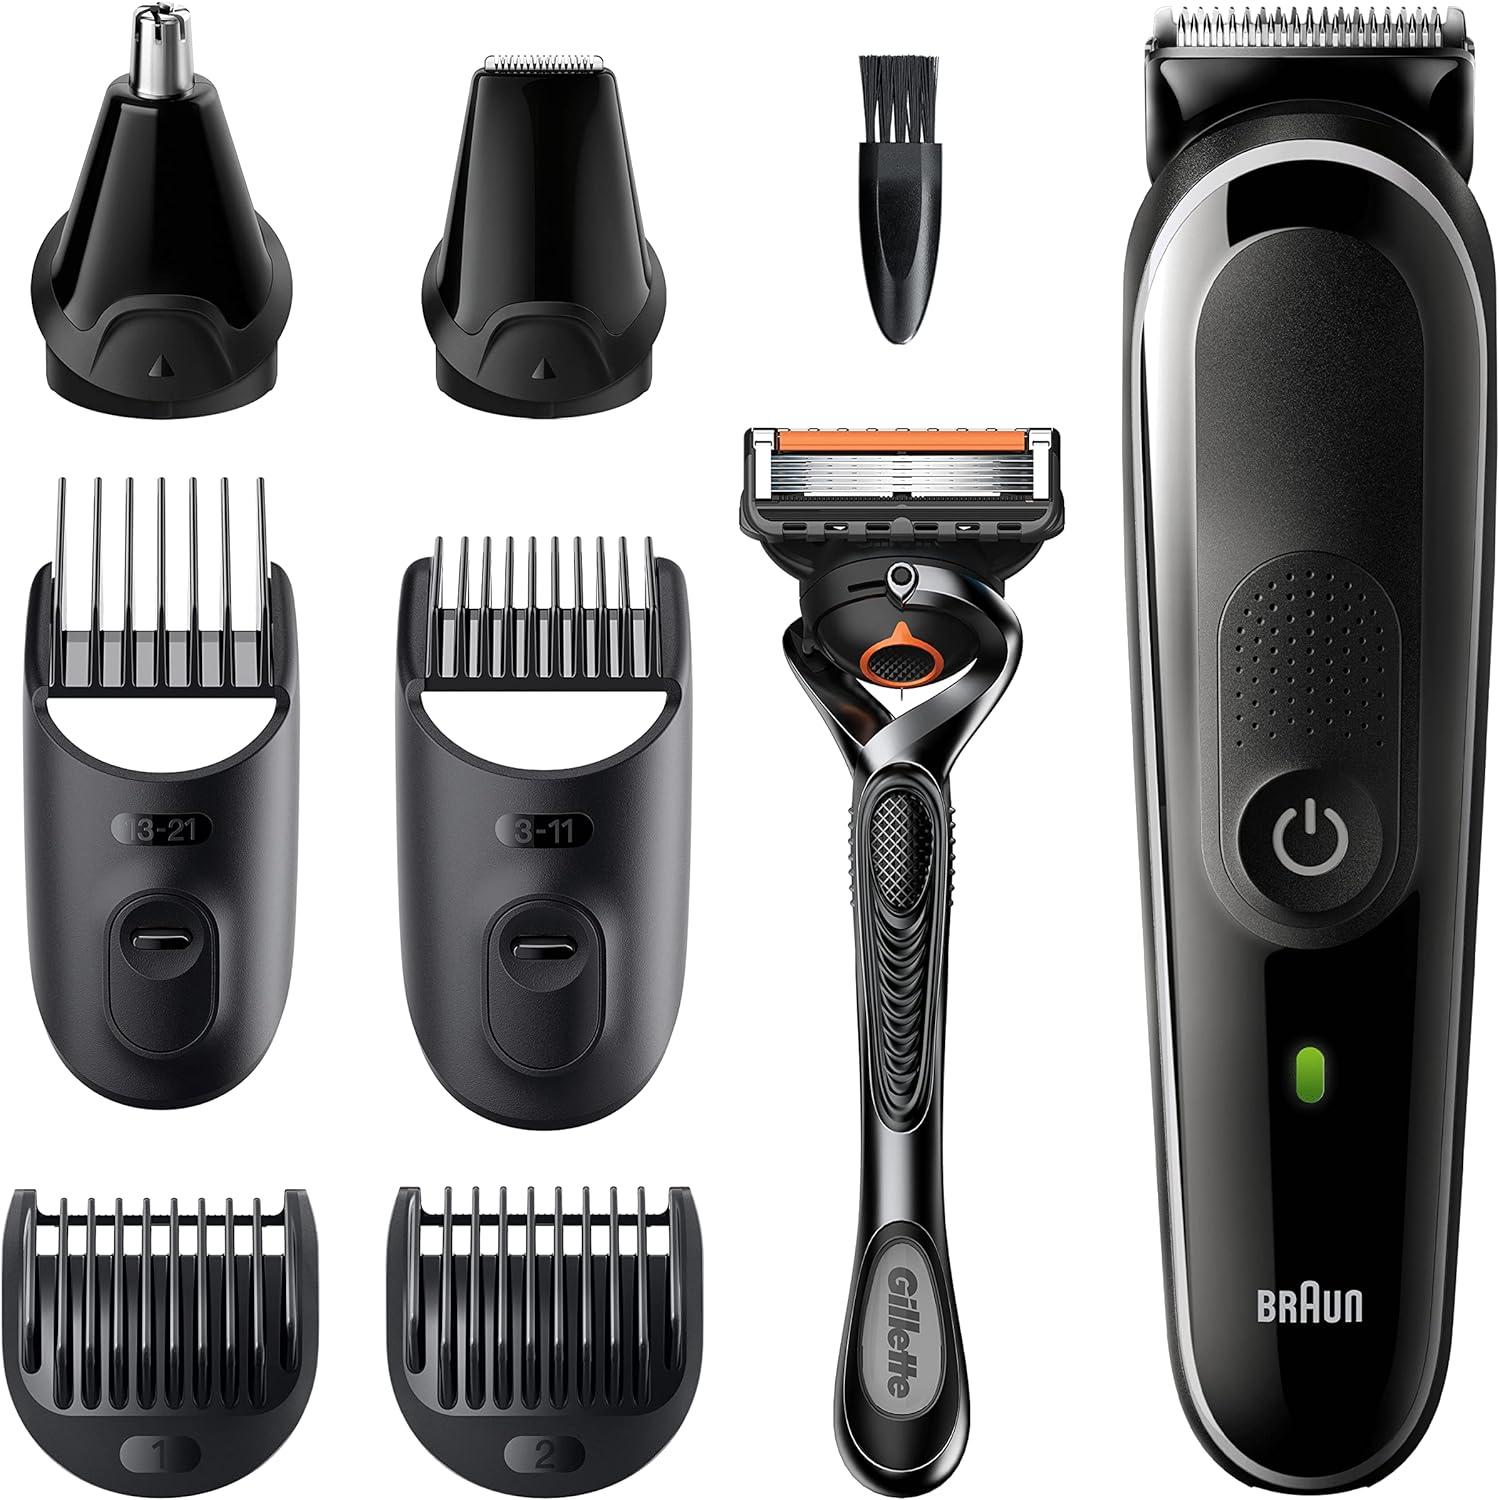 Braun 8-In-1 All-In-One Series Nose With Trimmer Grooming Kit Pin & Gillette UK 6 Beard 5 2 & Clippers Black/Grey Trimmer Hair Men MGK5260 Gifts Ear For Attachments Plug Razor Male